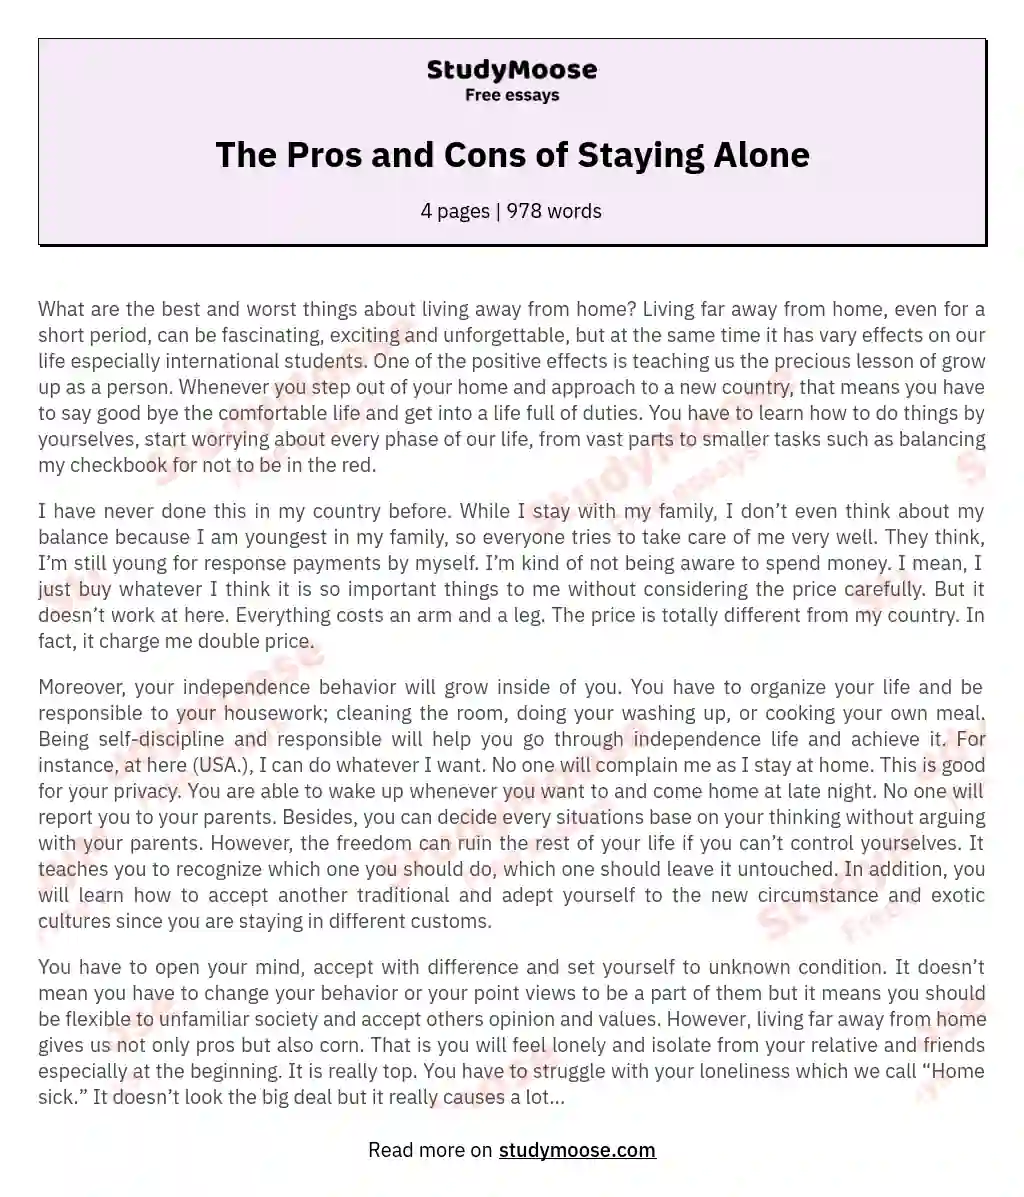 The Pros and Cons of Staying Alone essay